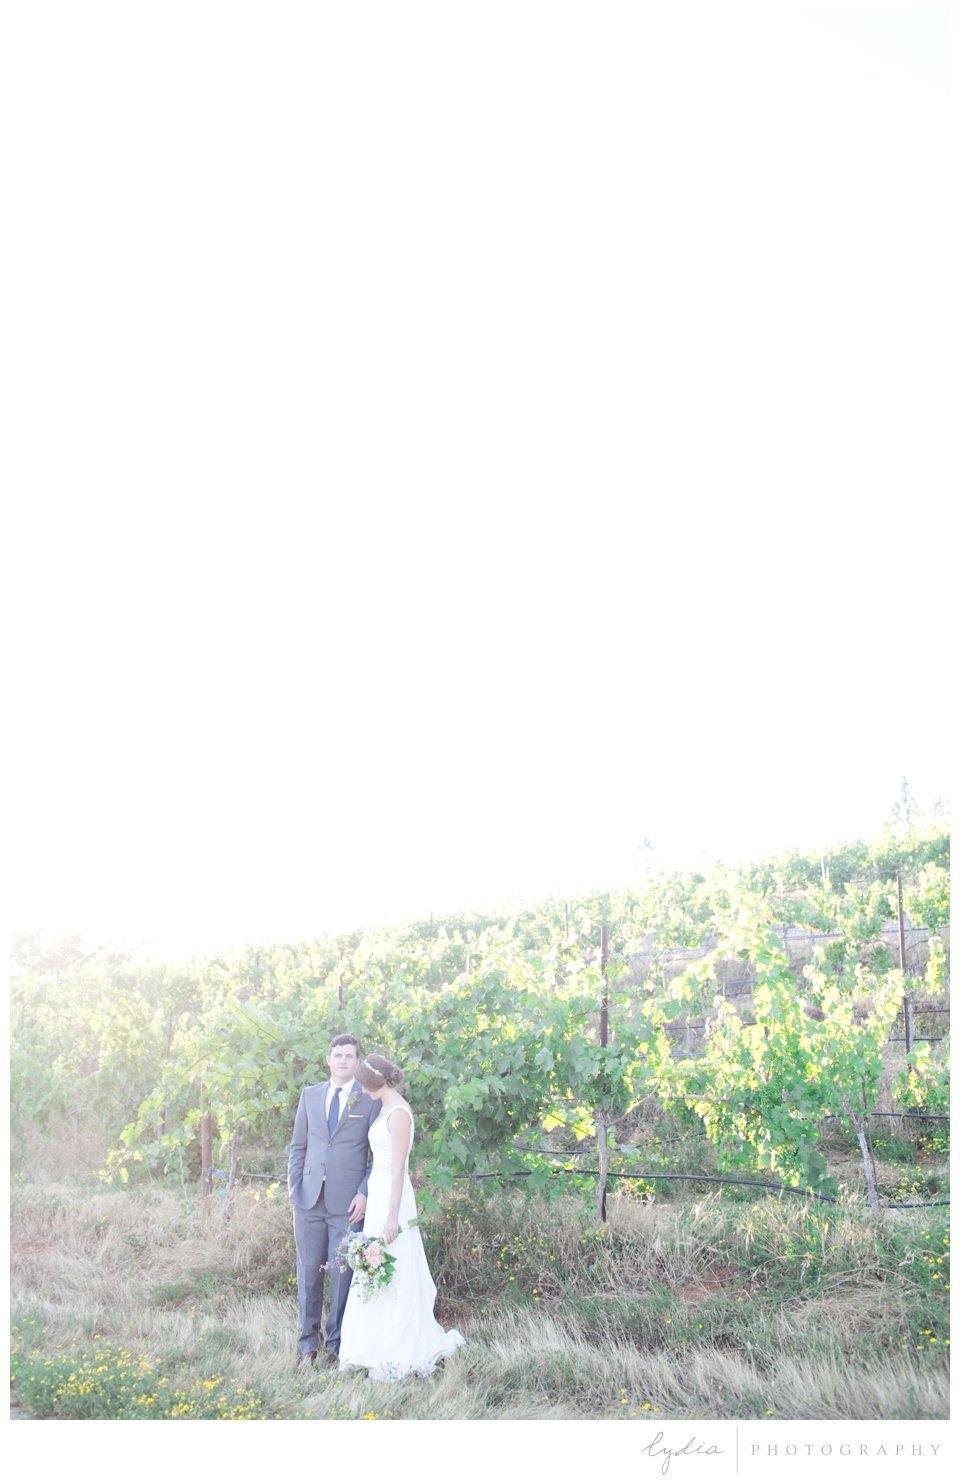 Bride and groom standing together at Lucchesi Vineyards wedding in Grass Valley, California.